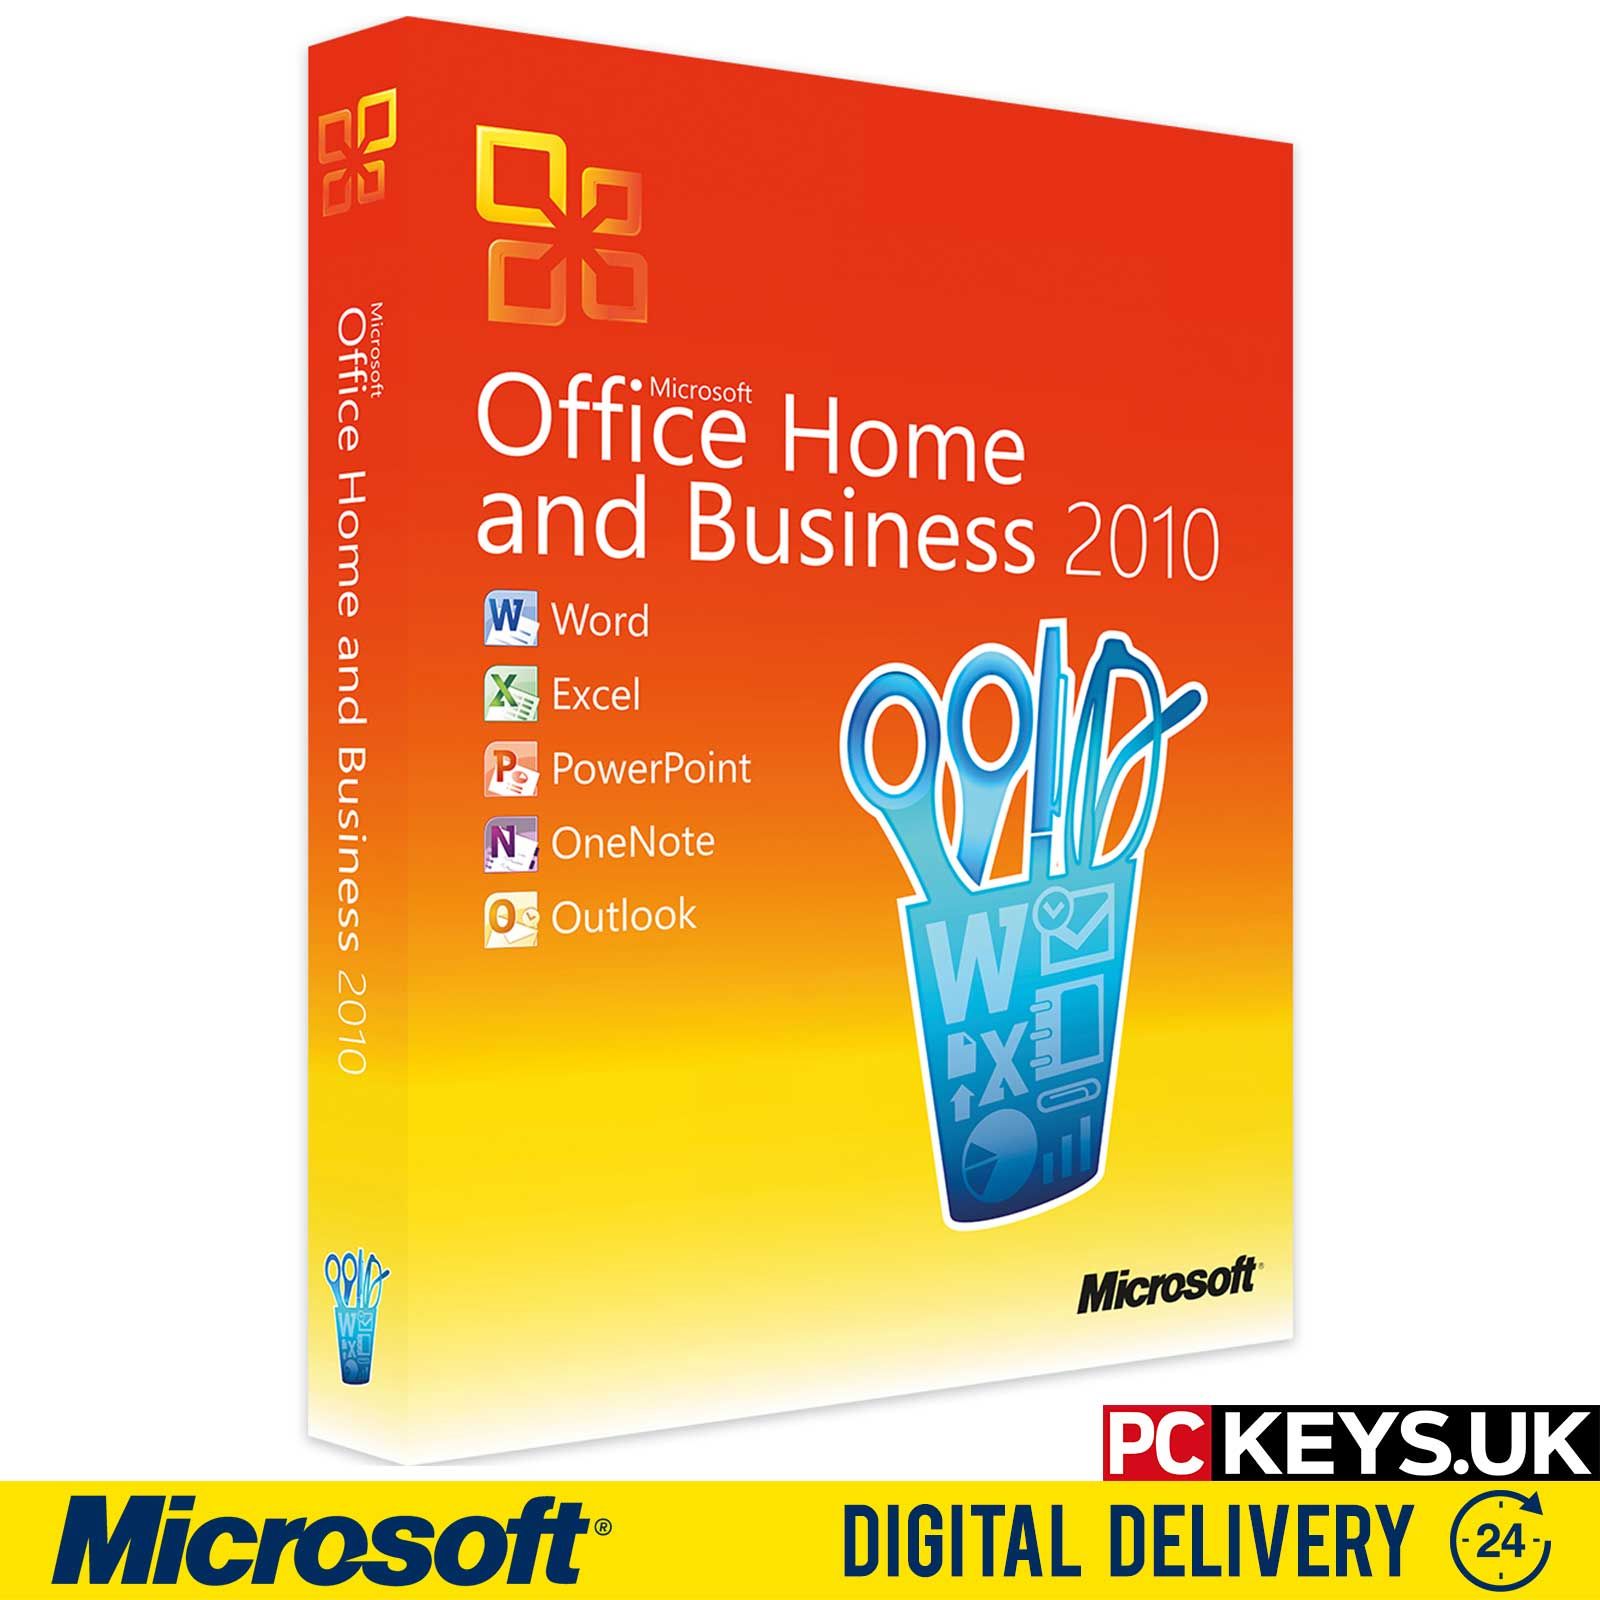 Buy Office 2010 Home Business software PC Keys Price £29